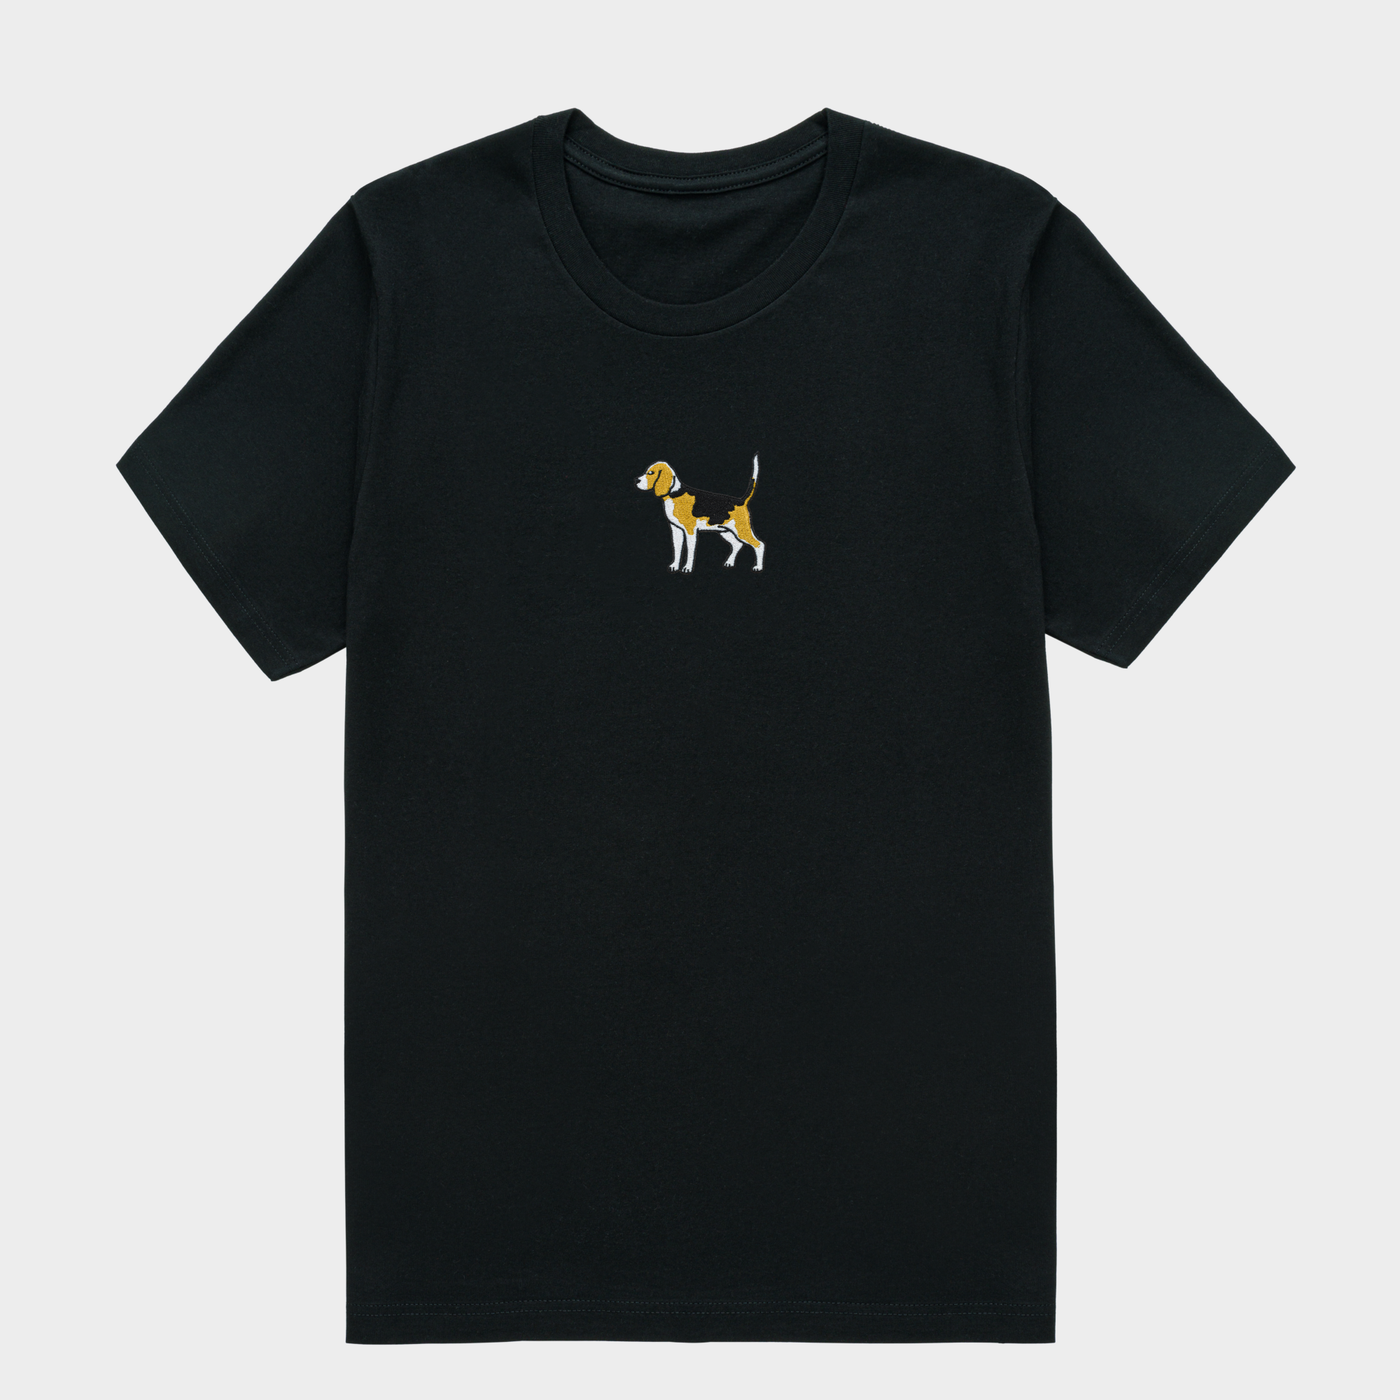 Bobby's Planet Men's Embroidered Beagle T-Shirt from Paws Dog Cat Animals Collection in Black Color#color_black